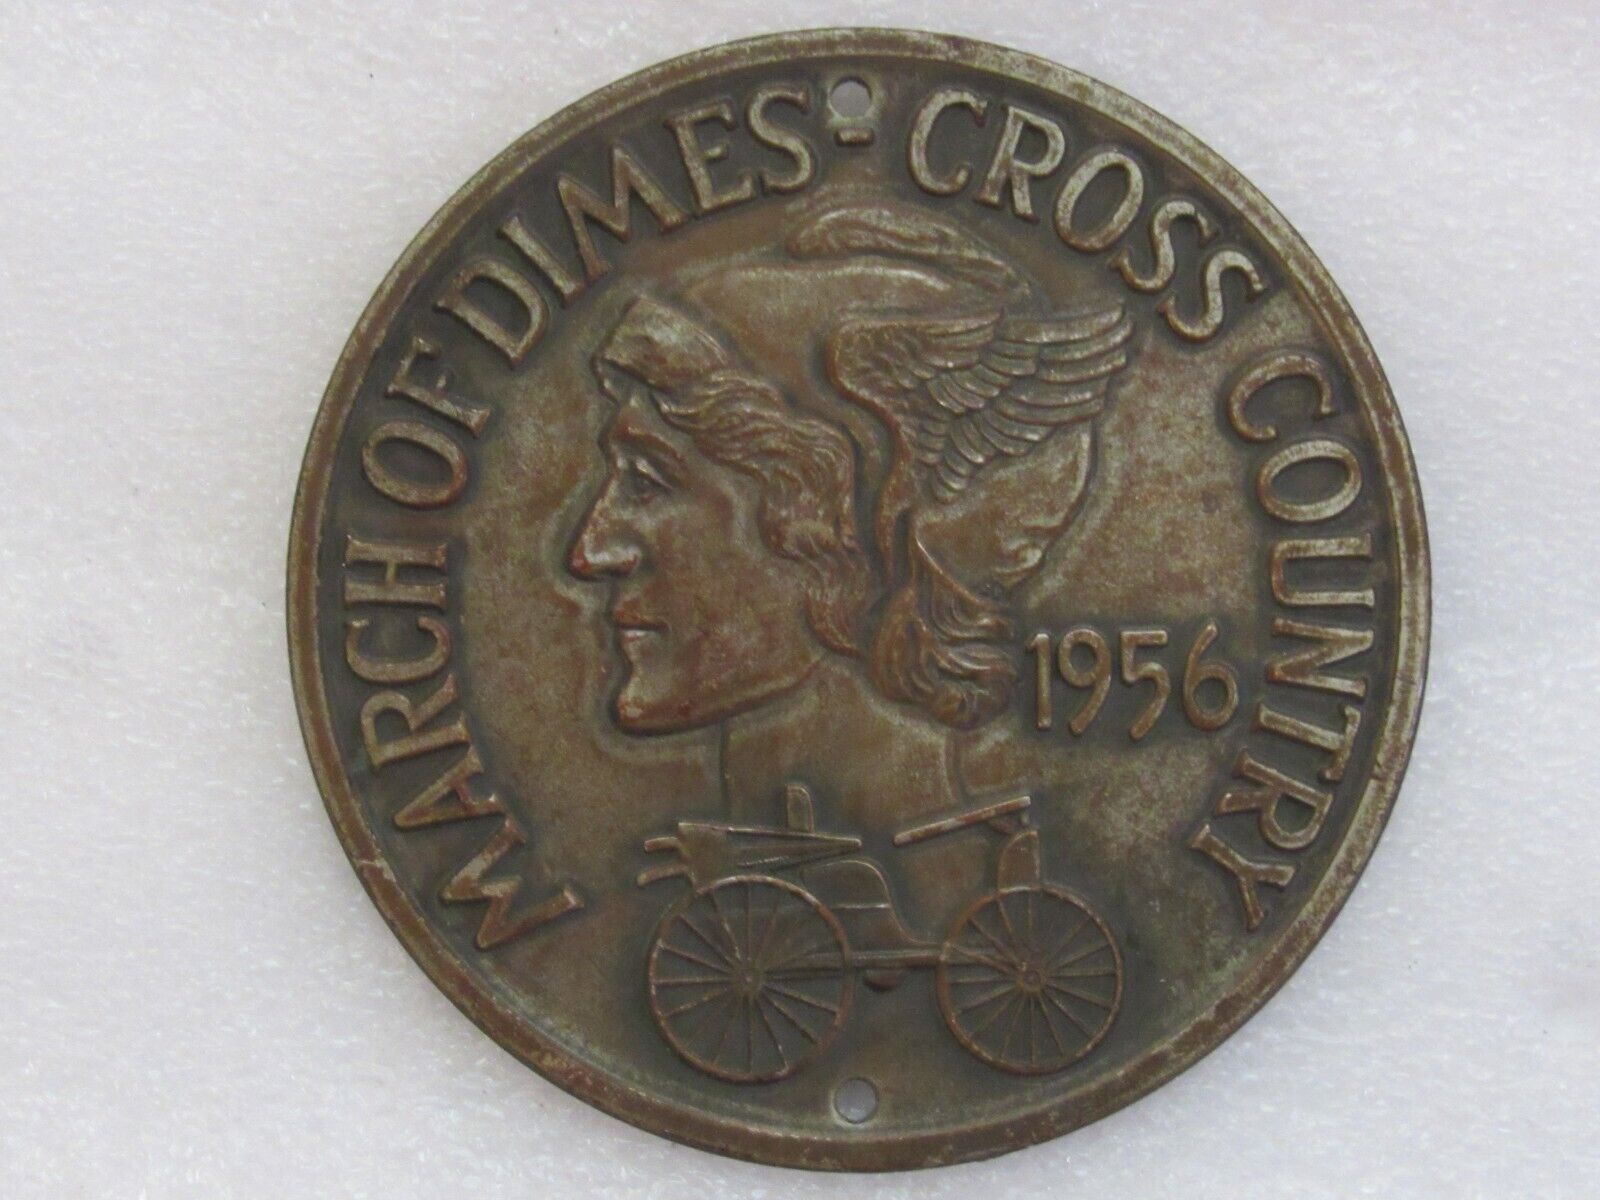 Vintage Antique March of Dimes 1956 Cross Country Medallion (Fighting Polio)